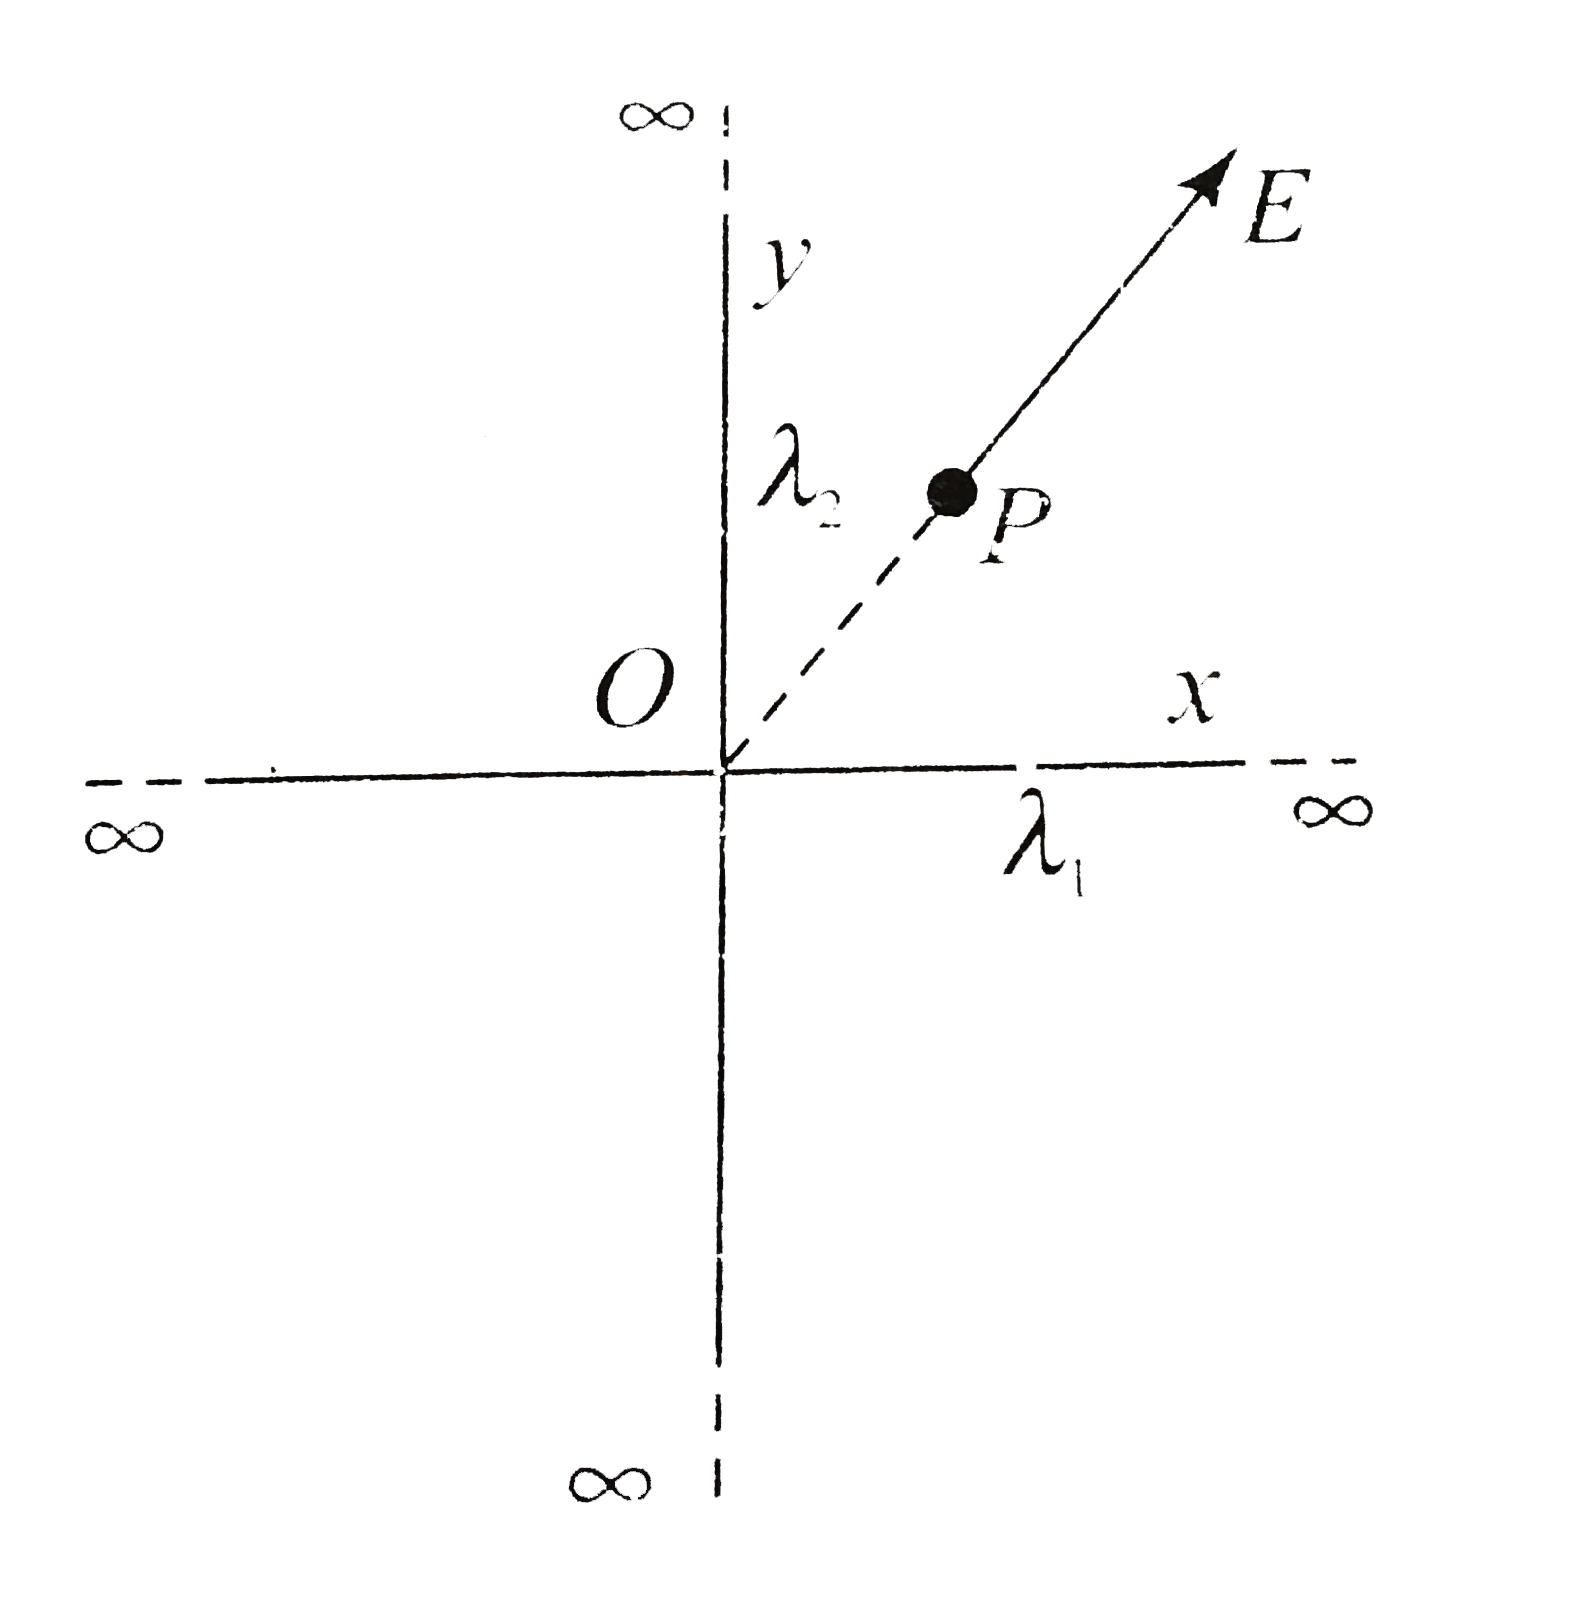 Two mutually perpendicular infinite wires along x-axis and y-axis carry charge densities lambda1 and lambda2. The electric line of force at P is along the line y = x//(sqrt3), where P is also a point lying on the same line. Find lambda2//lambda1.